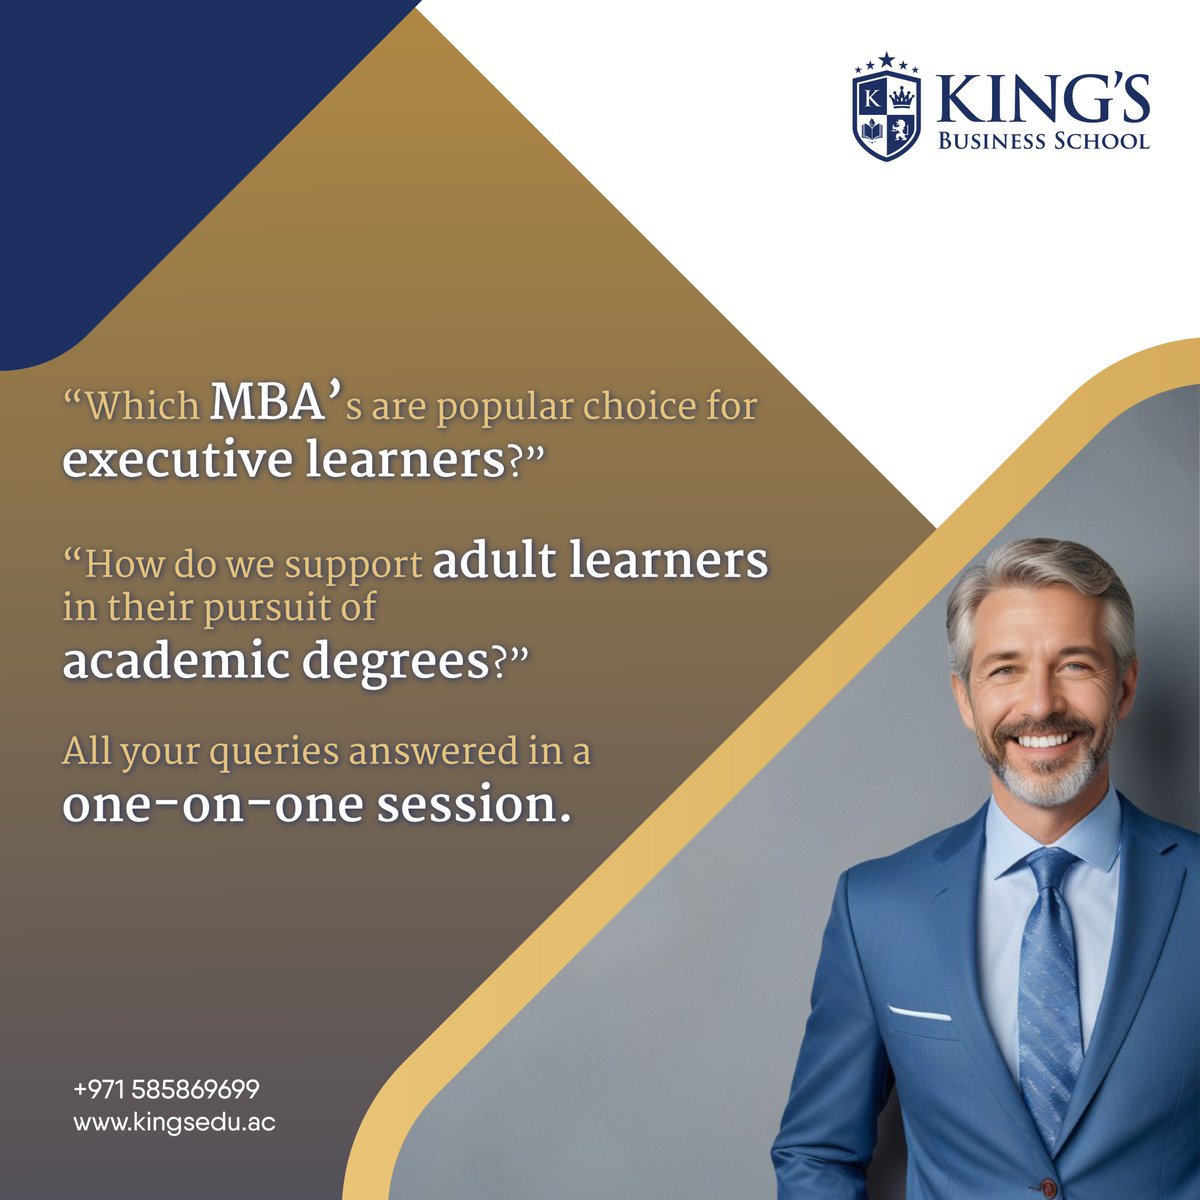 Ask away! We have the answers for your every question about MBAs
.
.
#AskAboutMBA #MBA #MBAPrograms #kingsbusinessschool #KingsBSchool